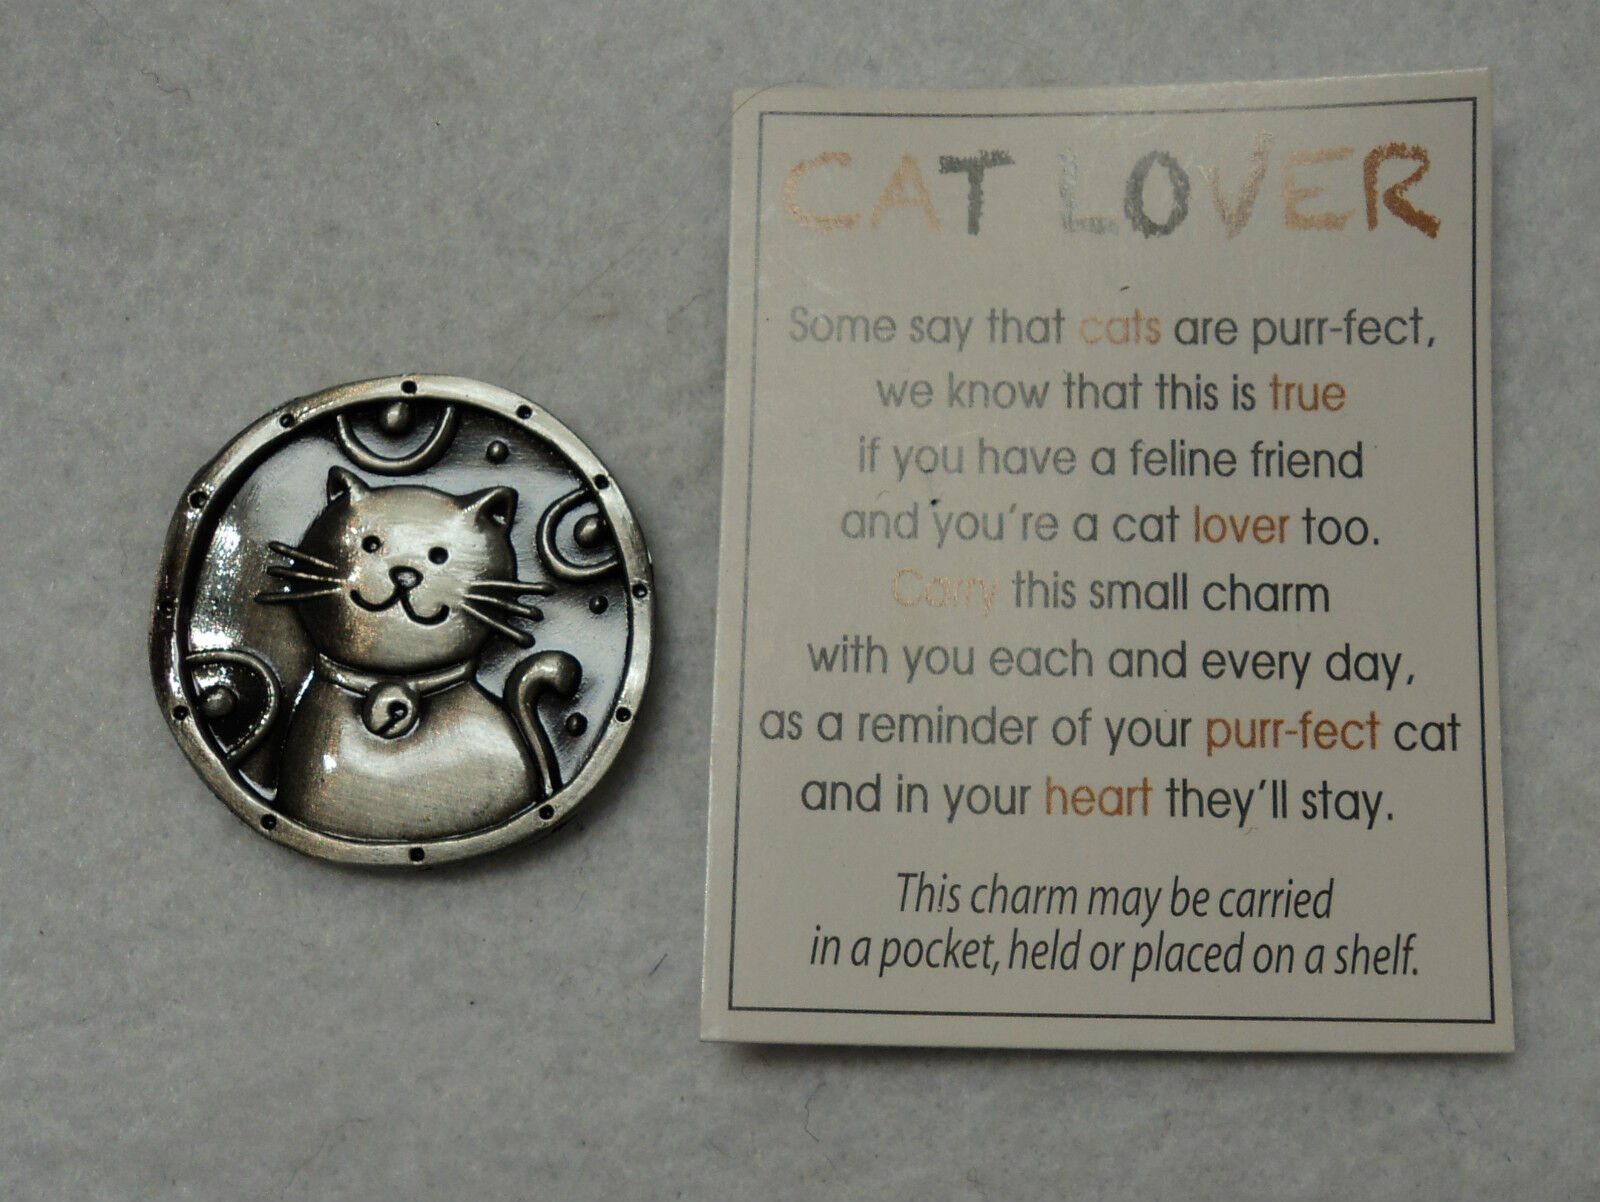 CAT LOVER POCKET TOKEN Cats are Purrfect lucky charm feline rescue kitty